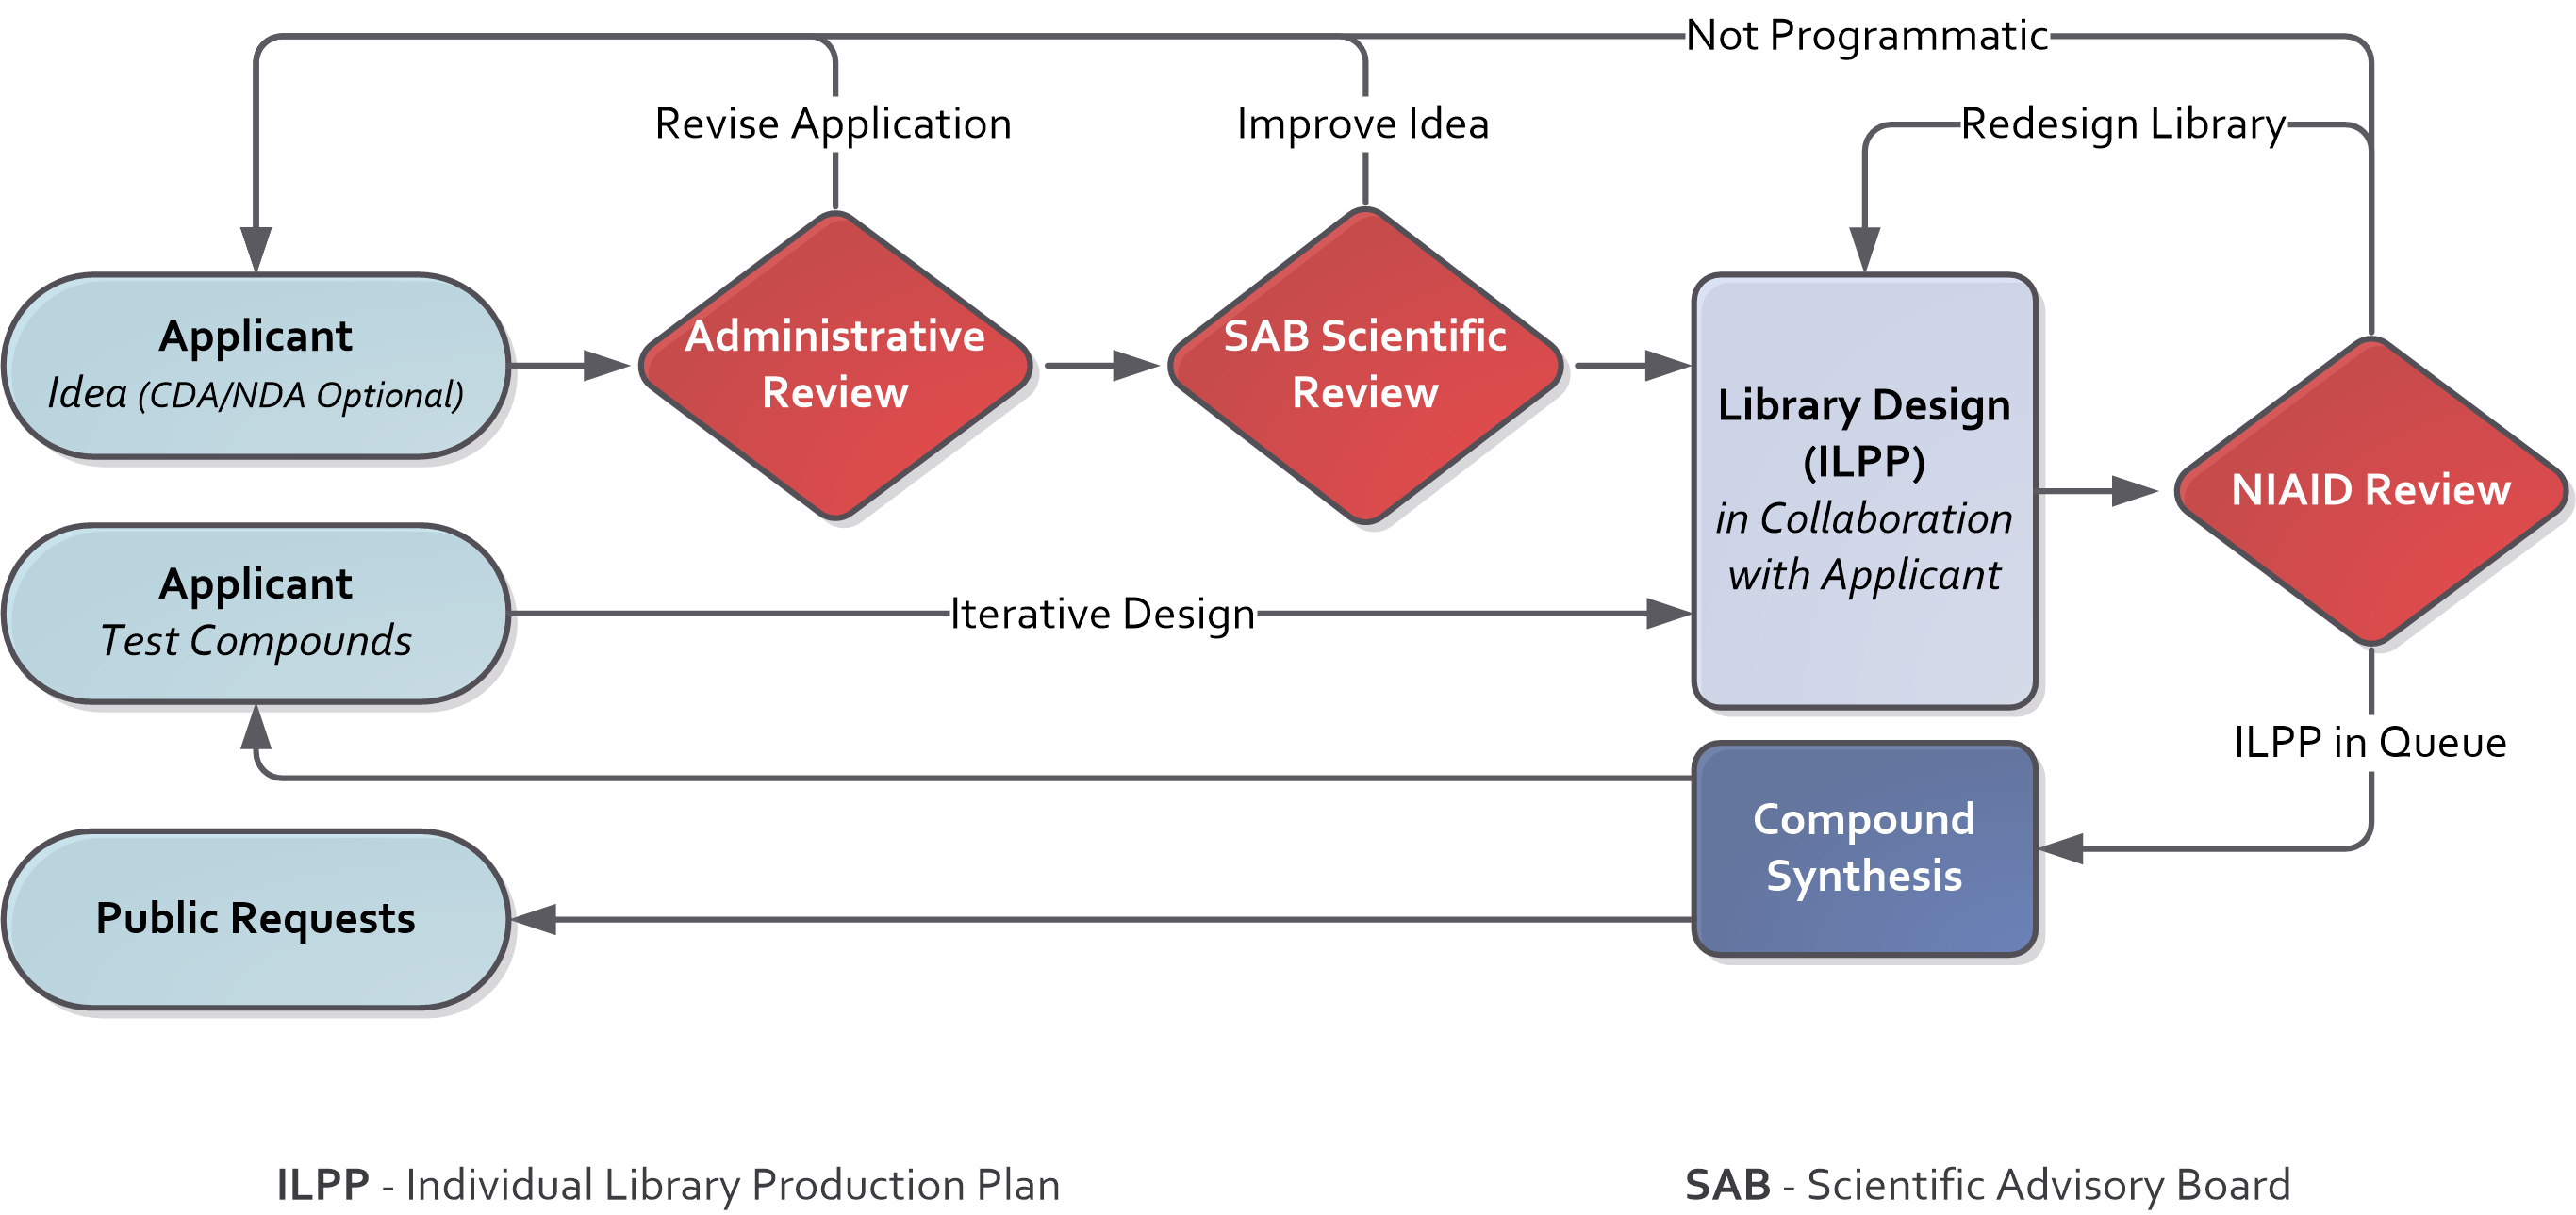 Diagram showing workflow process. First path shows Applicant Idea (CDA/NDA Optional) going to CC4CARB Submission Online and then Administrative Review. If revising application, back to Applicant Idea, but if accepted then SAB Scientific Review. If improving idea, back to Applicant Idea, but if accepted then Library Design in Collaboration with Submitter. Then, Individual Library Production Plan and then COR Review. After COR Review, if Not Programmatic, back to Applicant Idea. After COR Review, if Redesigning Library, then Library Design in Collaboration with Submitter. After COR Review, if Individual Library Production Plan in queue, then Compound Synthesis, and then Added to CC4CARB Collection. Second path shows Applicant Request Compounds through Iterative Design going to Library Design in Collaboration with Submitter, and Applicant Request Compounds back and forth with Added to CC4CARB Collection.